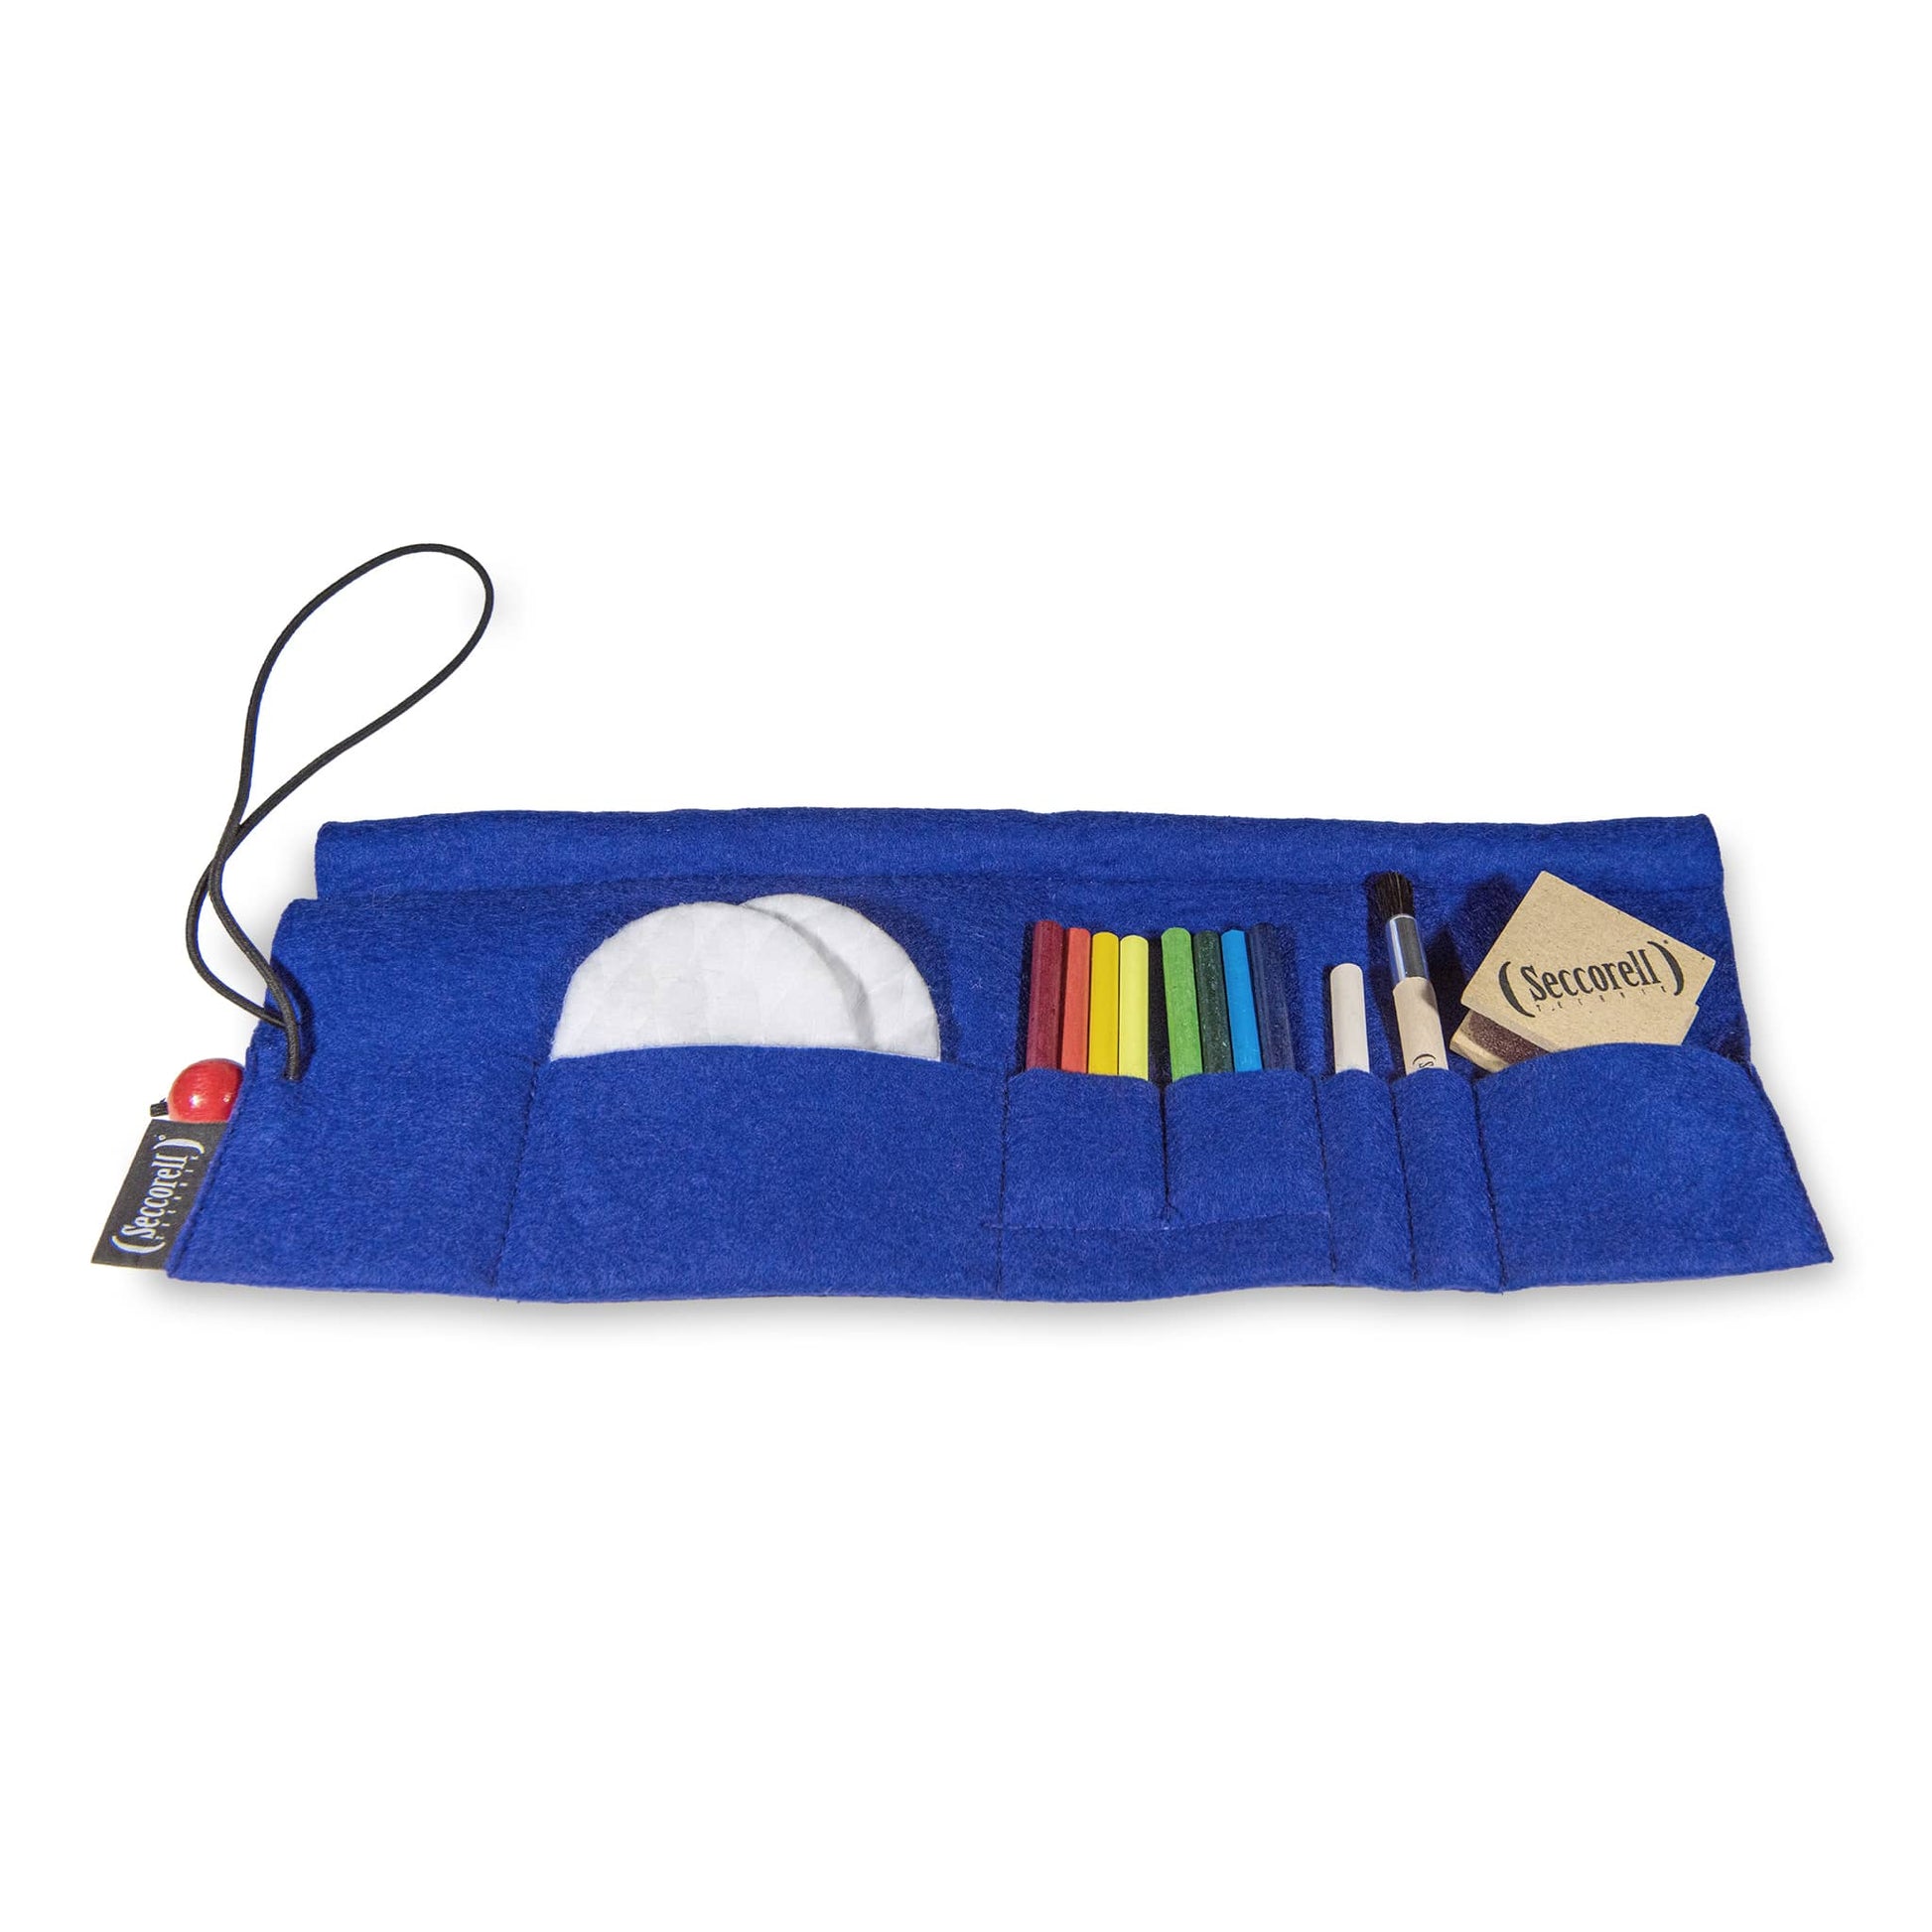 Seccorell felt roller bag open in blue with elastic cord and red wooden bead, including color sticks, rubbing block, natural brush and accessory compartment.